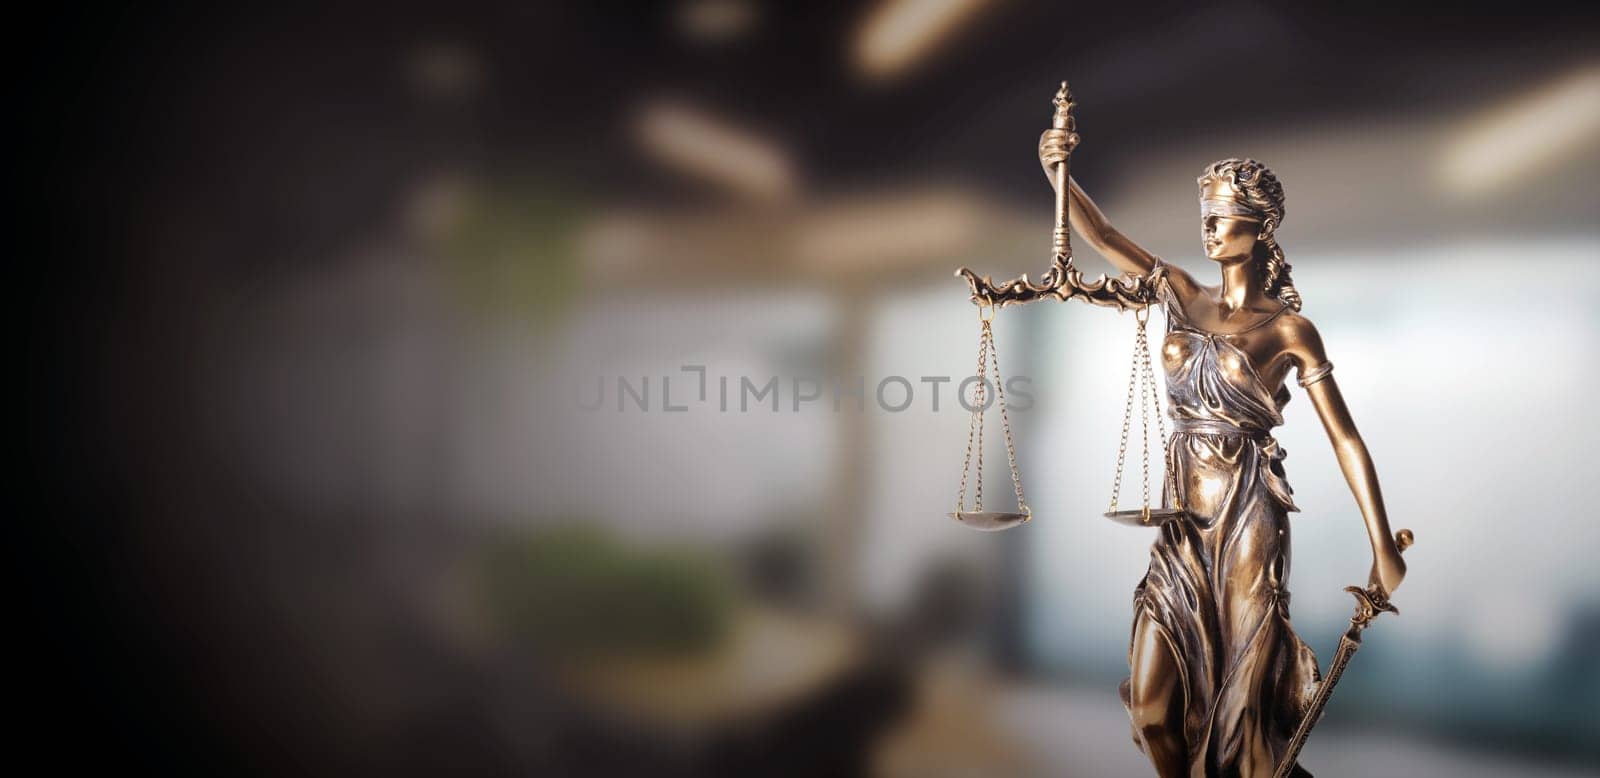 Blind justice symbol on a metallic statue. Law and justice concept, copy space